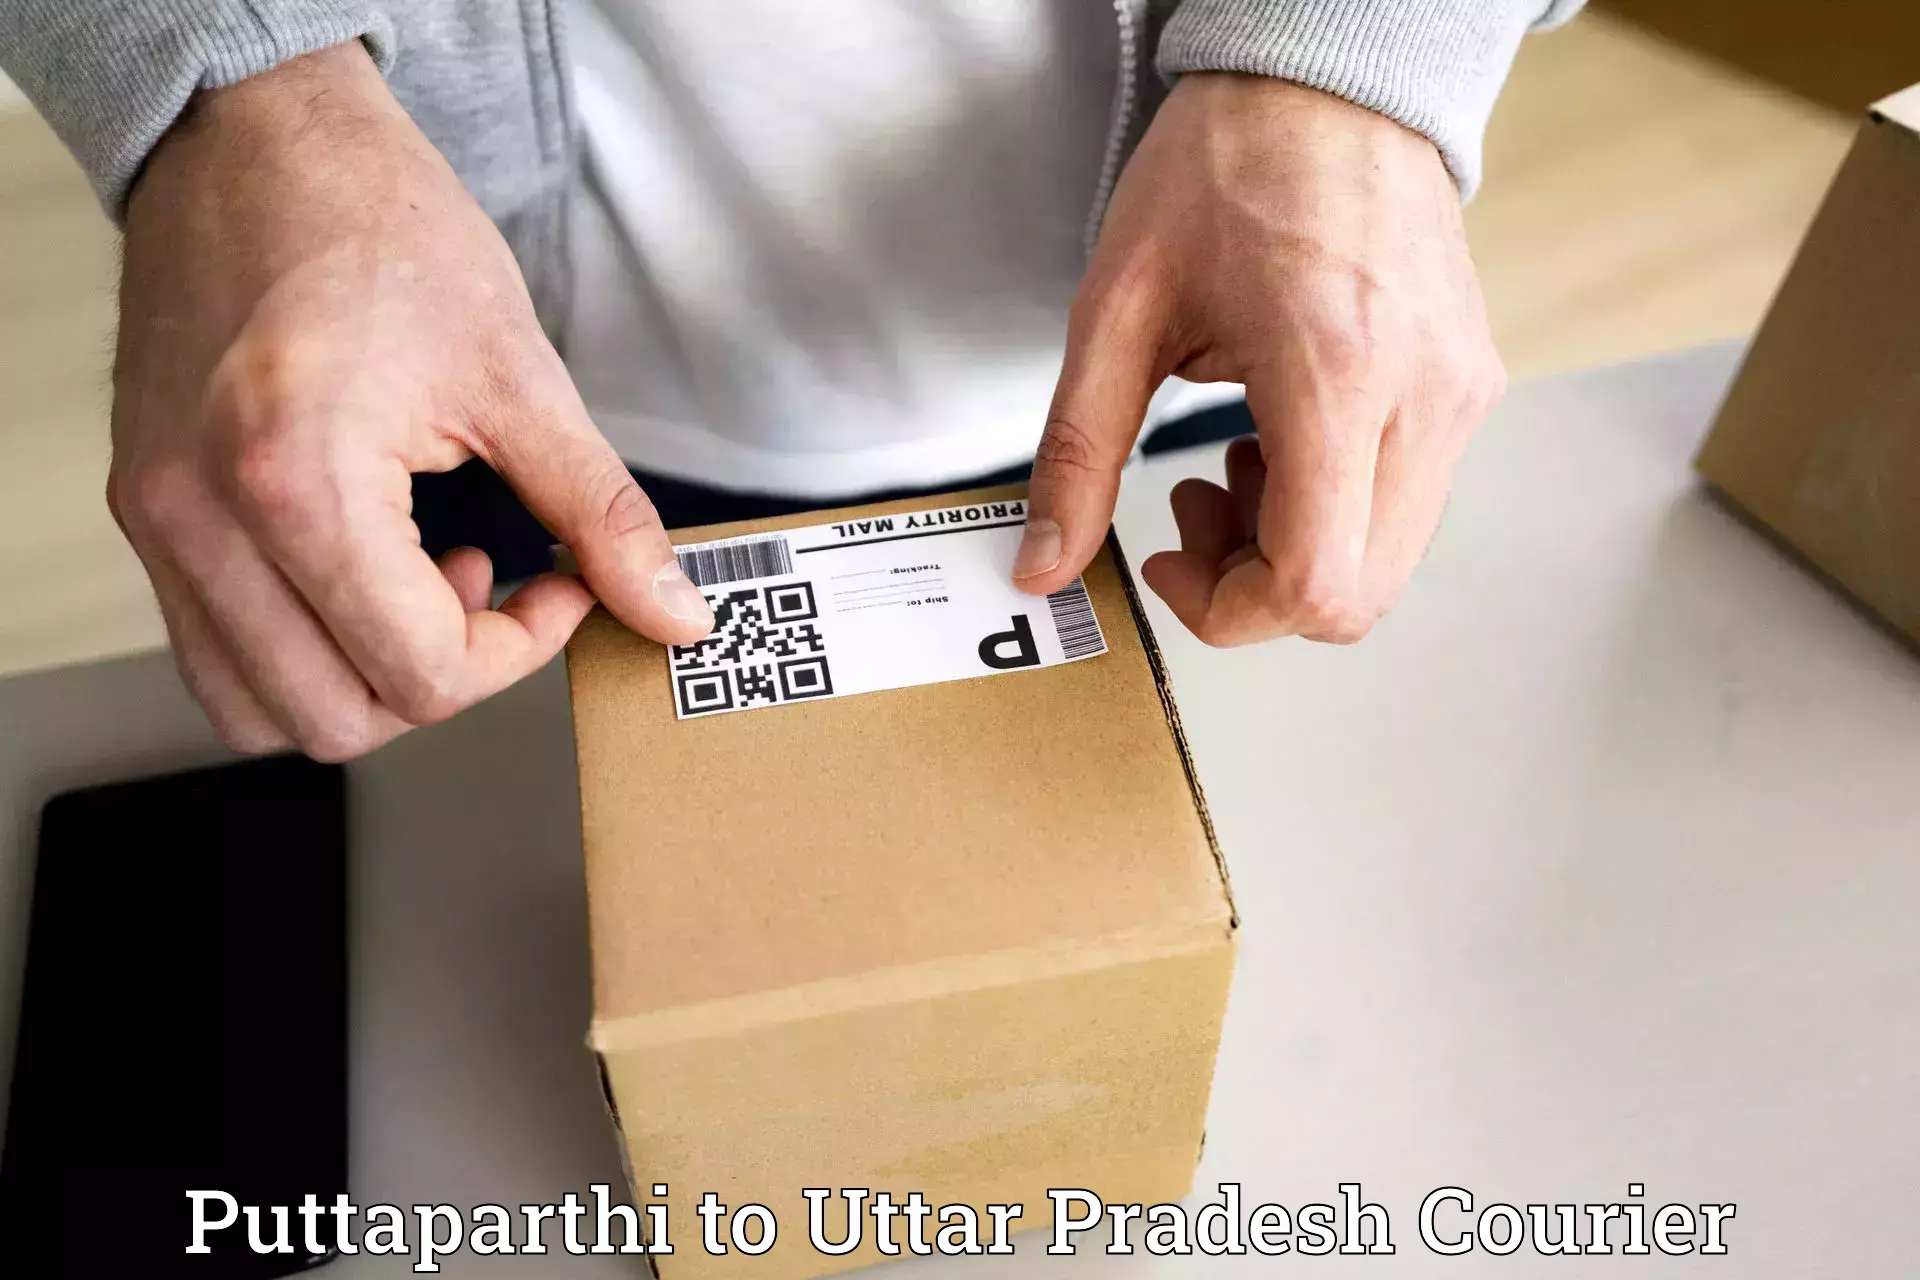 Local delivery service Puttaparthi to Dullahpur